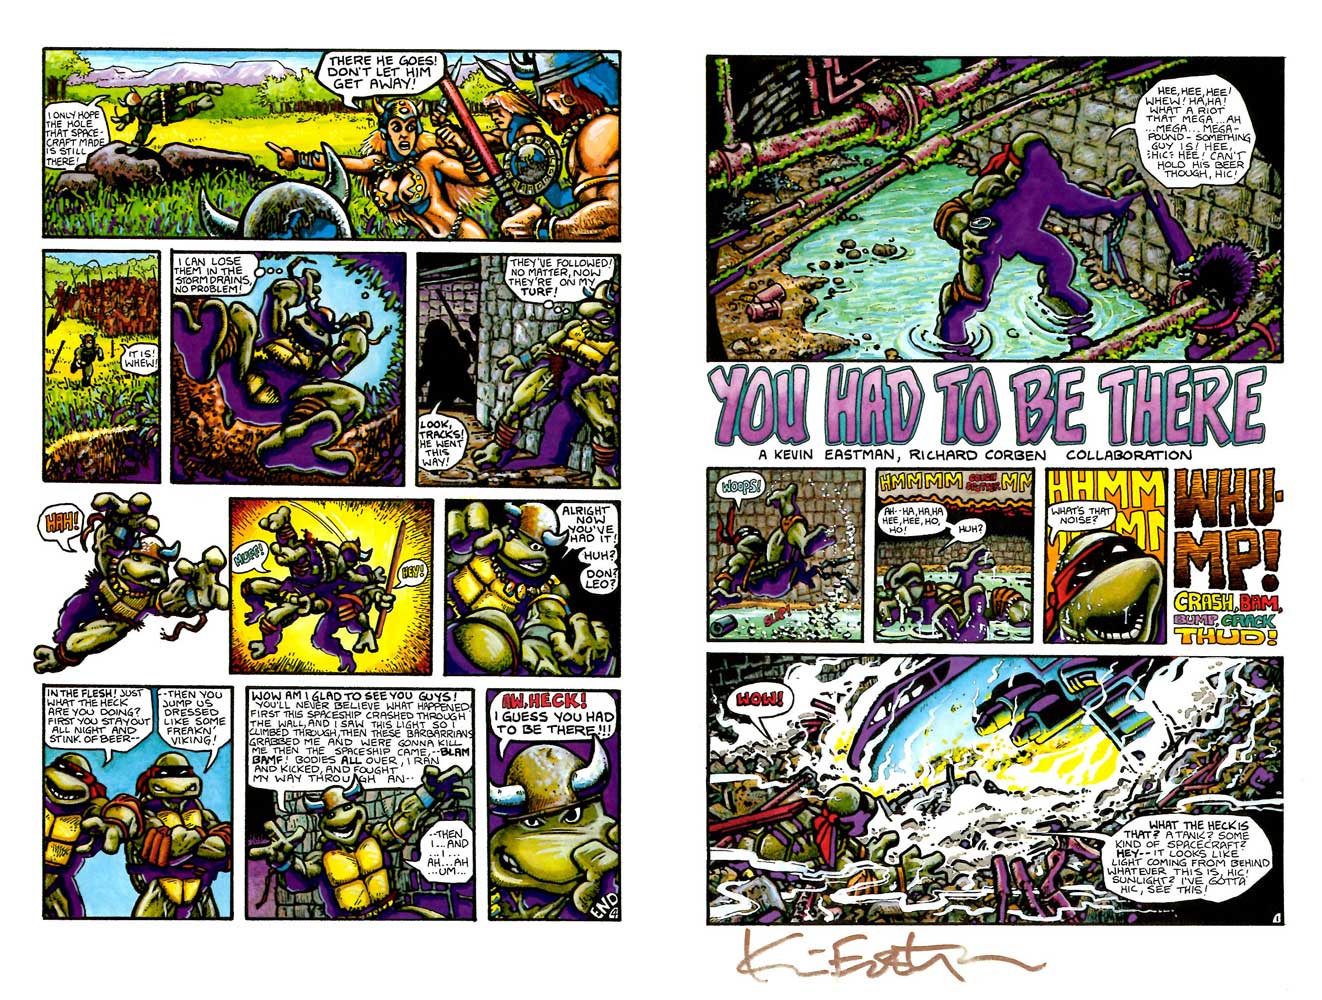 Eastman, Corben signed 4 page story AND Turtles Take Time – Back In Stock